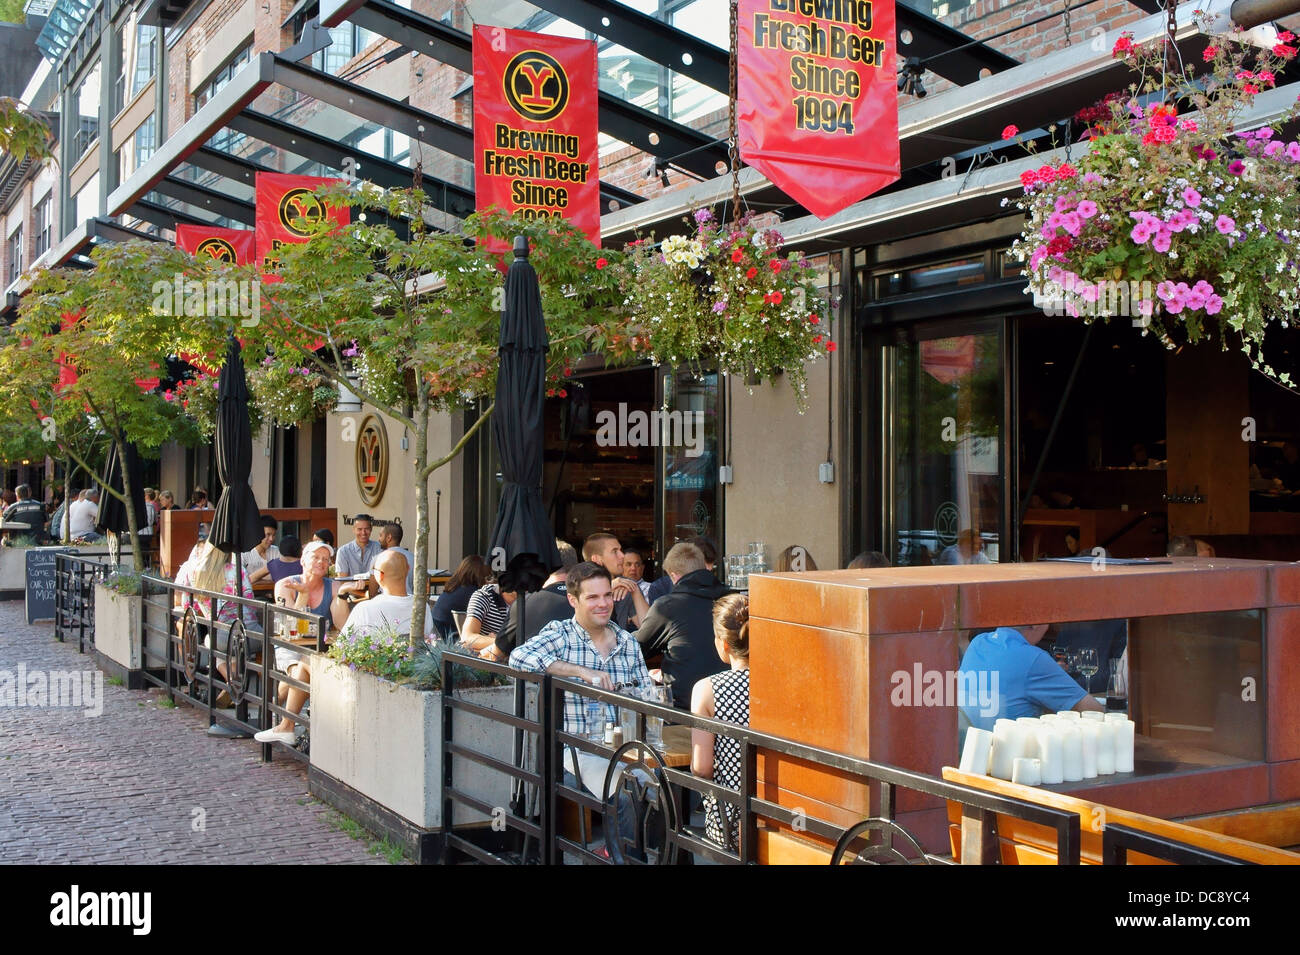 People dining on outdoor patio of the Yaletown Brewing Company restaurant in Yaletown, Vancouver, British Columbia, Canada Stock Photo